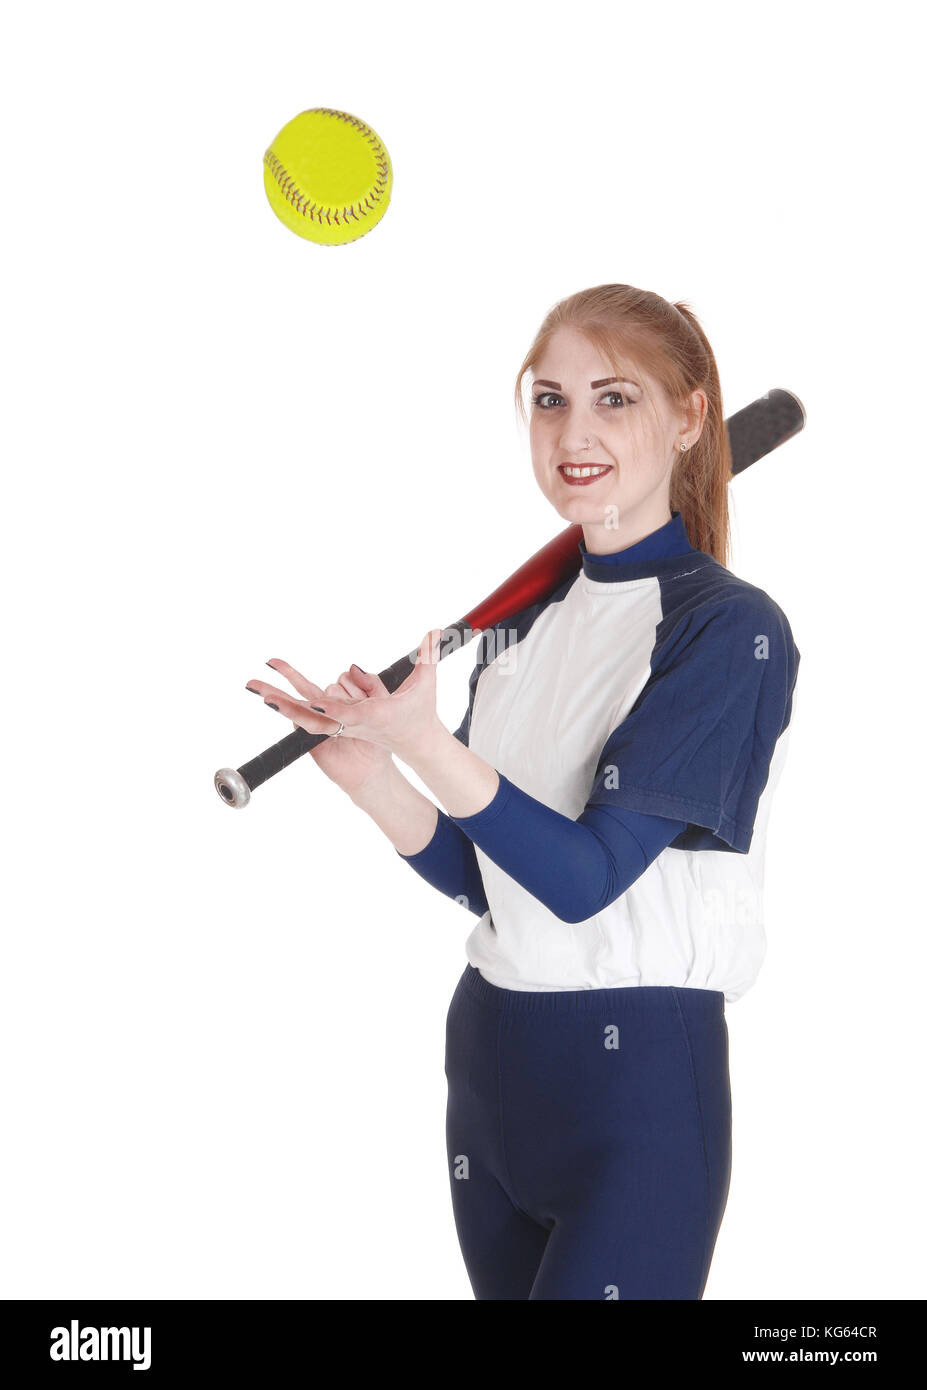 A smiling young woman standing in her blue softball uniform playing with the yellow ball holding her bat, isolated for white background Stock Photo